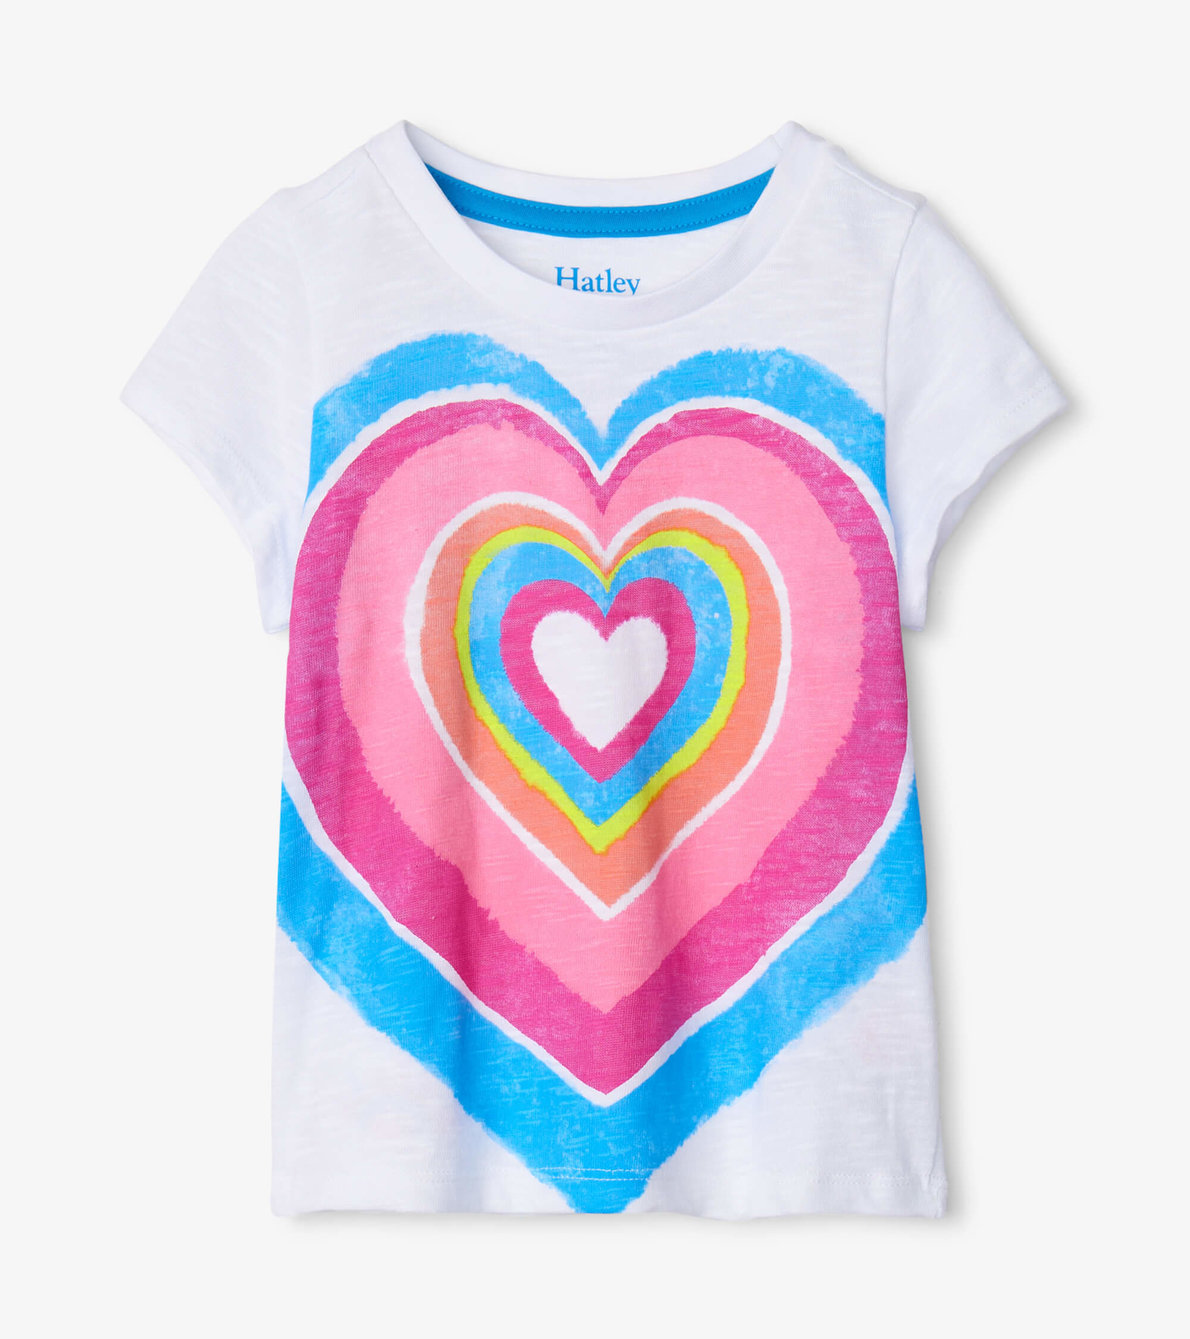 View larger image of Psychedelic Heart Graphic Tee